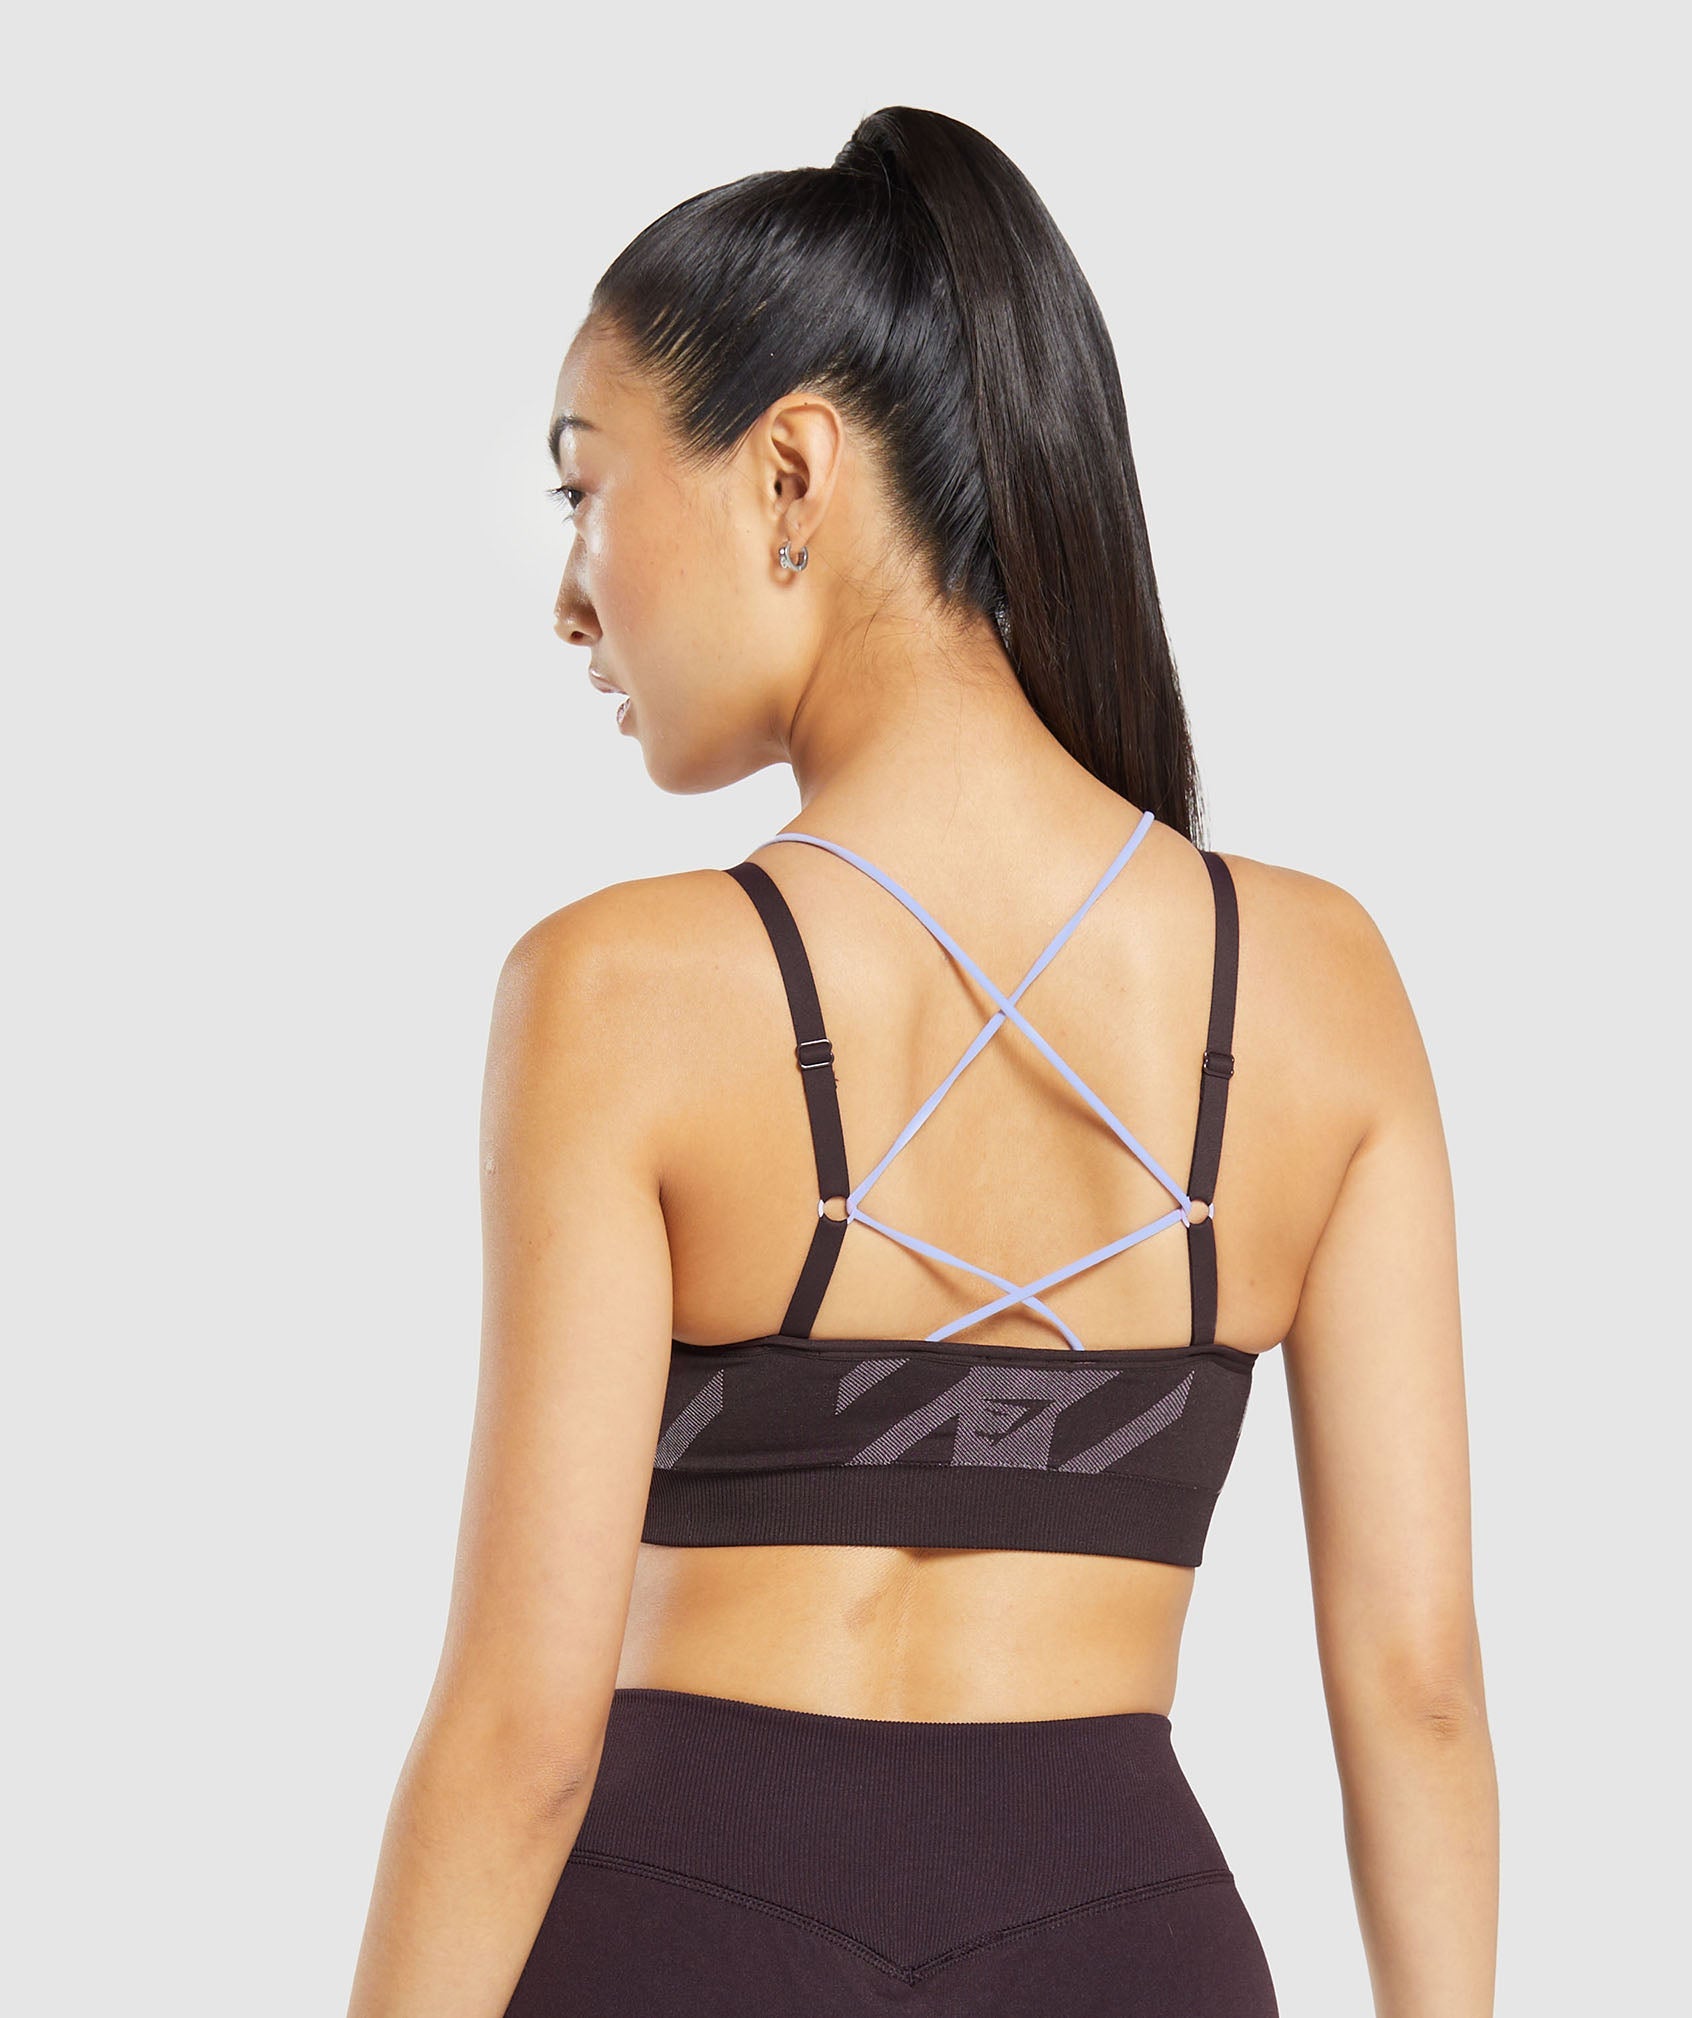 Apex Limit Seamless Ruched Sports Bra in Plum Brown/Powder Lilac - view 2